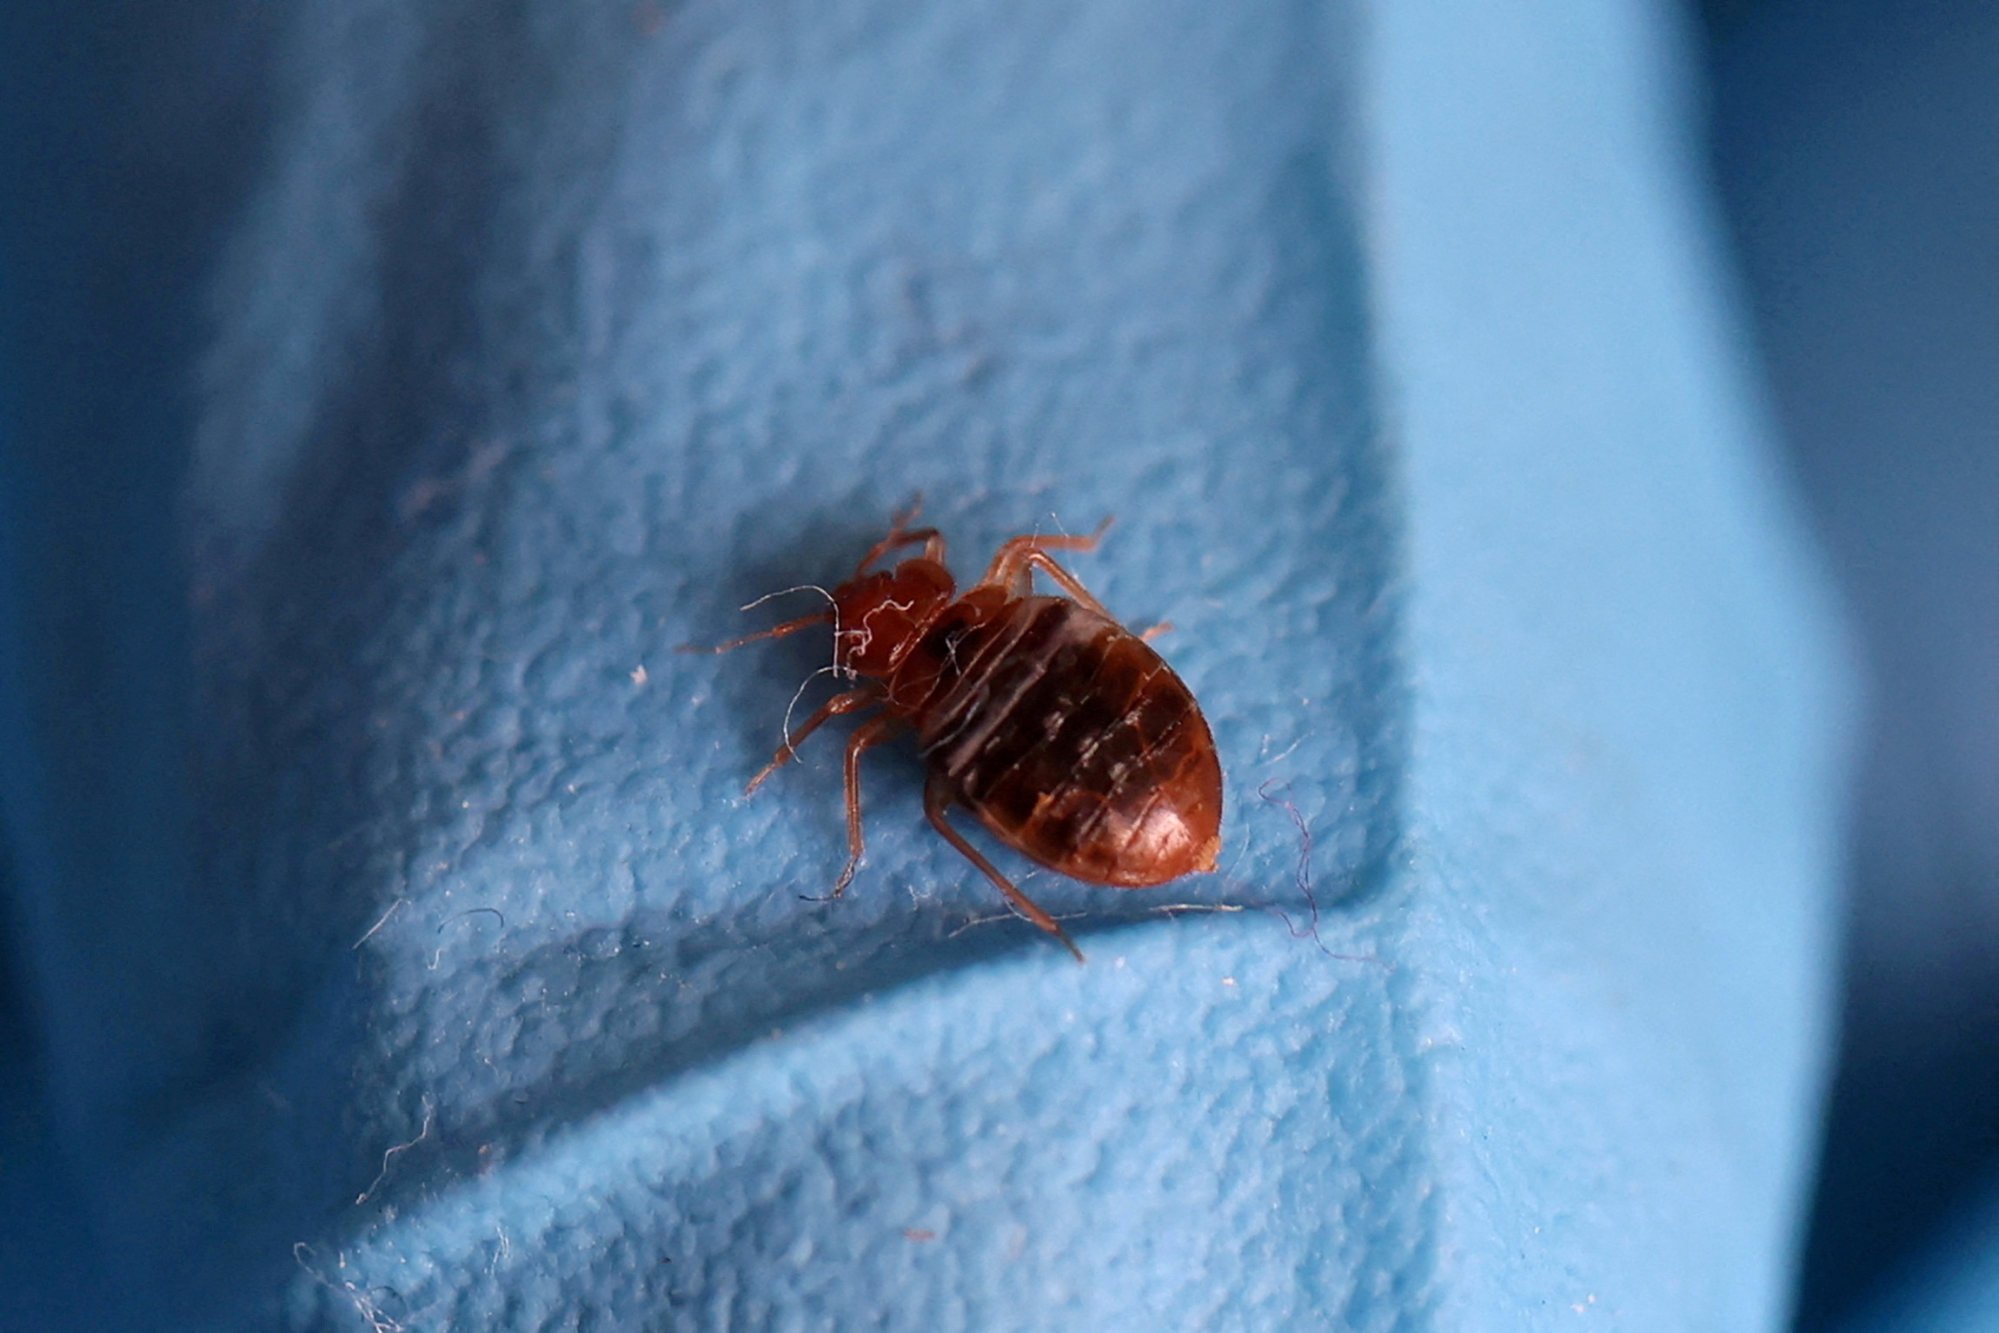 hong kong travel firm aims to take bite out of bedbug scare with partial refund to first customer who finds live pest on south korea tours